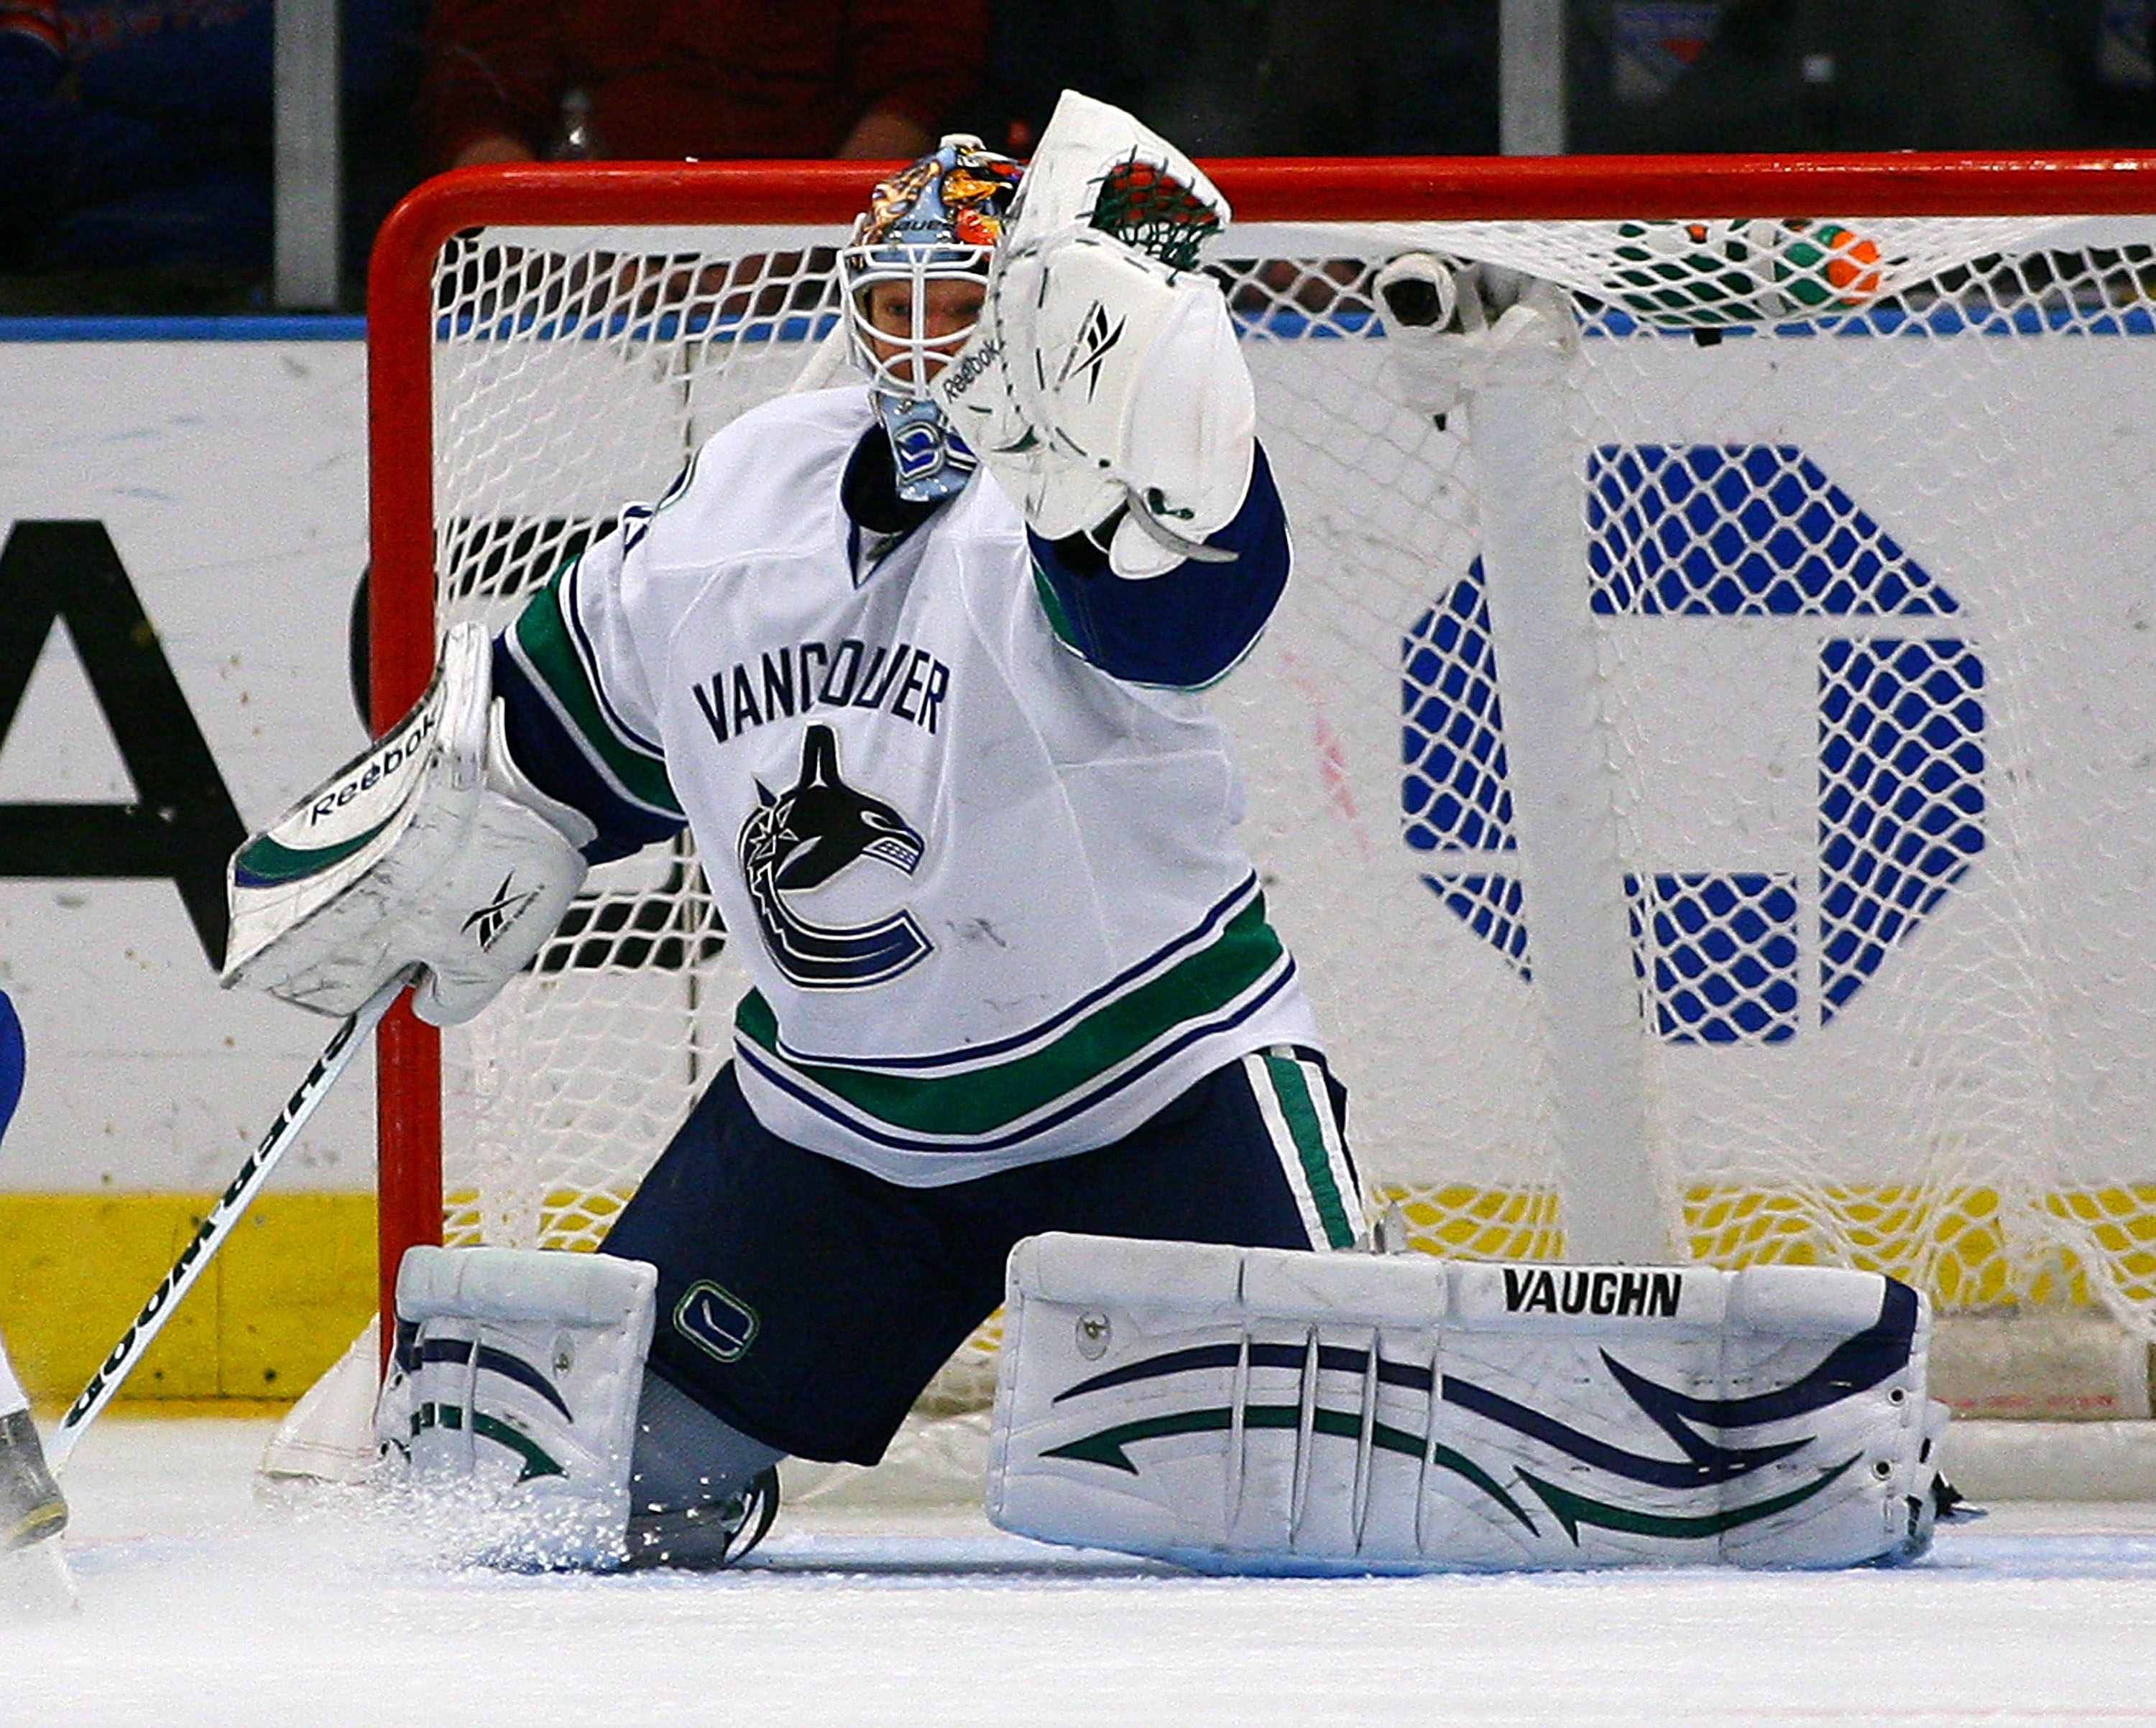 NEW YORK , NY - JANUARY 13: Goaltender Cory Schneider #35 of the Vancouver Canucks makes a glove save against the New York Rangers during the game at Madison Square Garden on January 13, 2011 in New York City. (Photo by Andy Marlin/Getty Images)